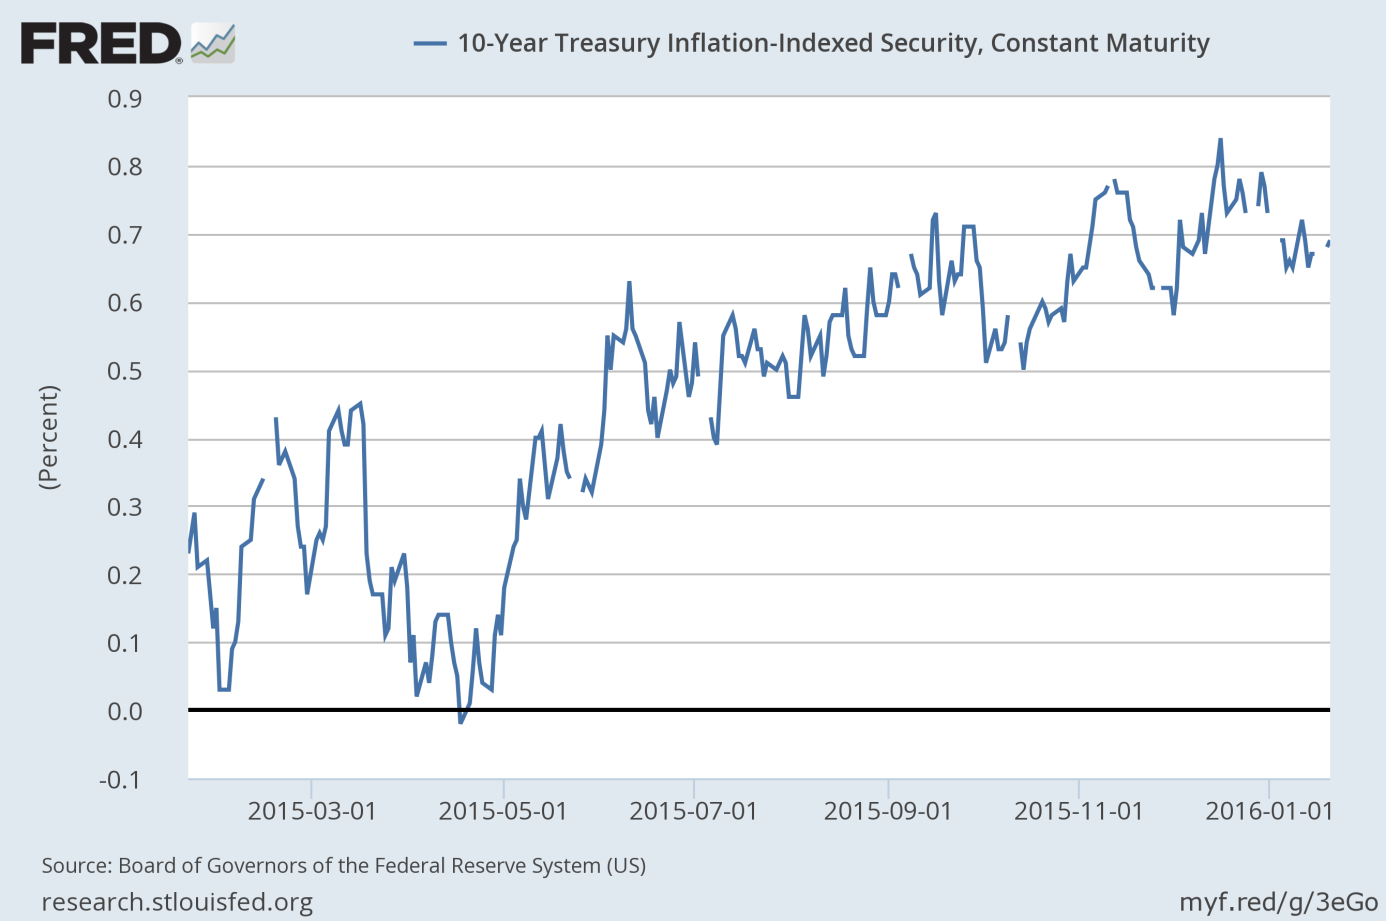 U.S. real interest rates (yields on 10-year Treasury Inflation-Indexed Security) over the last twelve months.